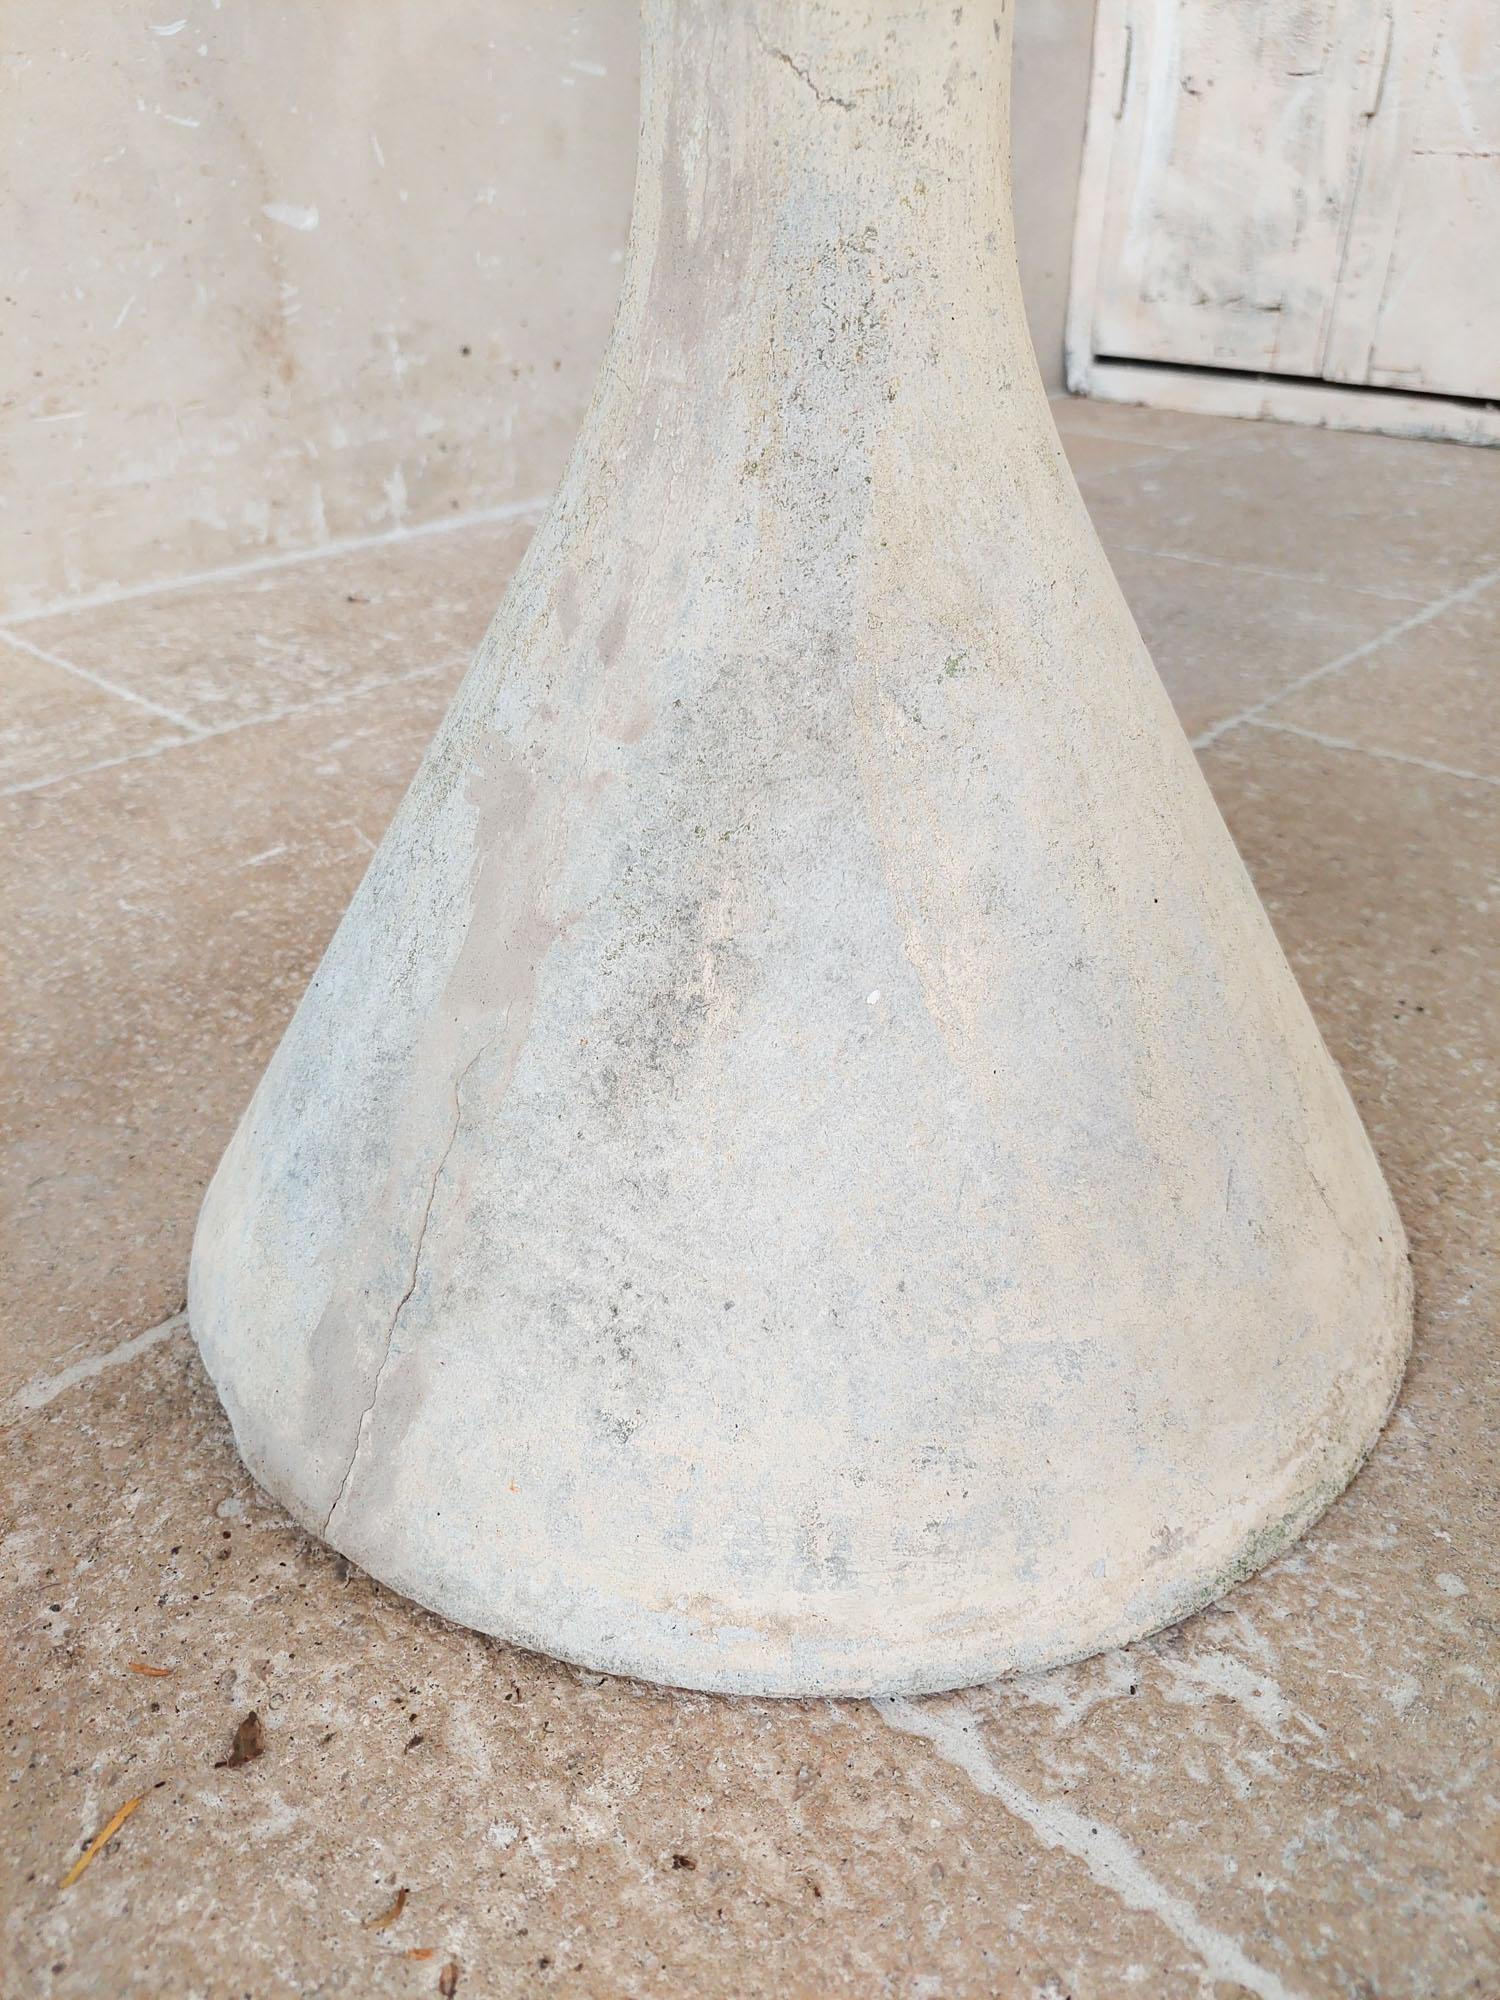 Concrete Pair of Willy Guhl Diablo Hourglass Planters by Eternit For Sale